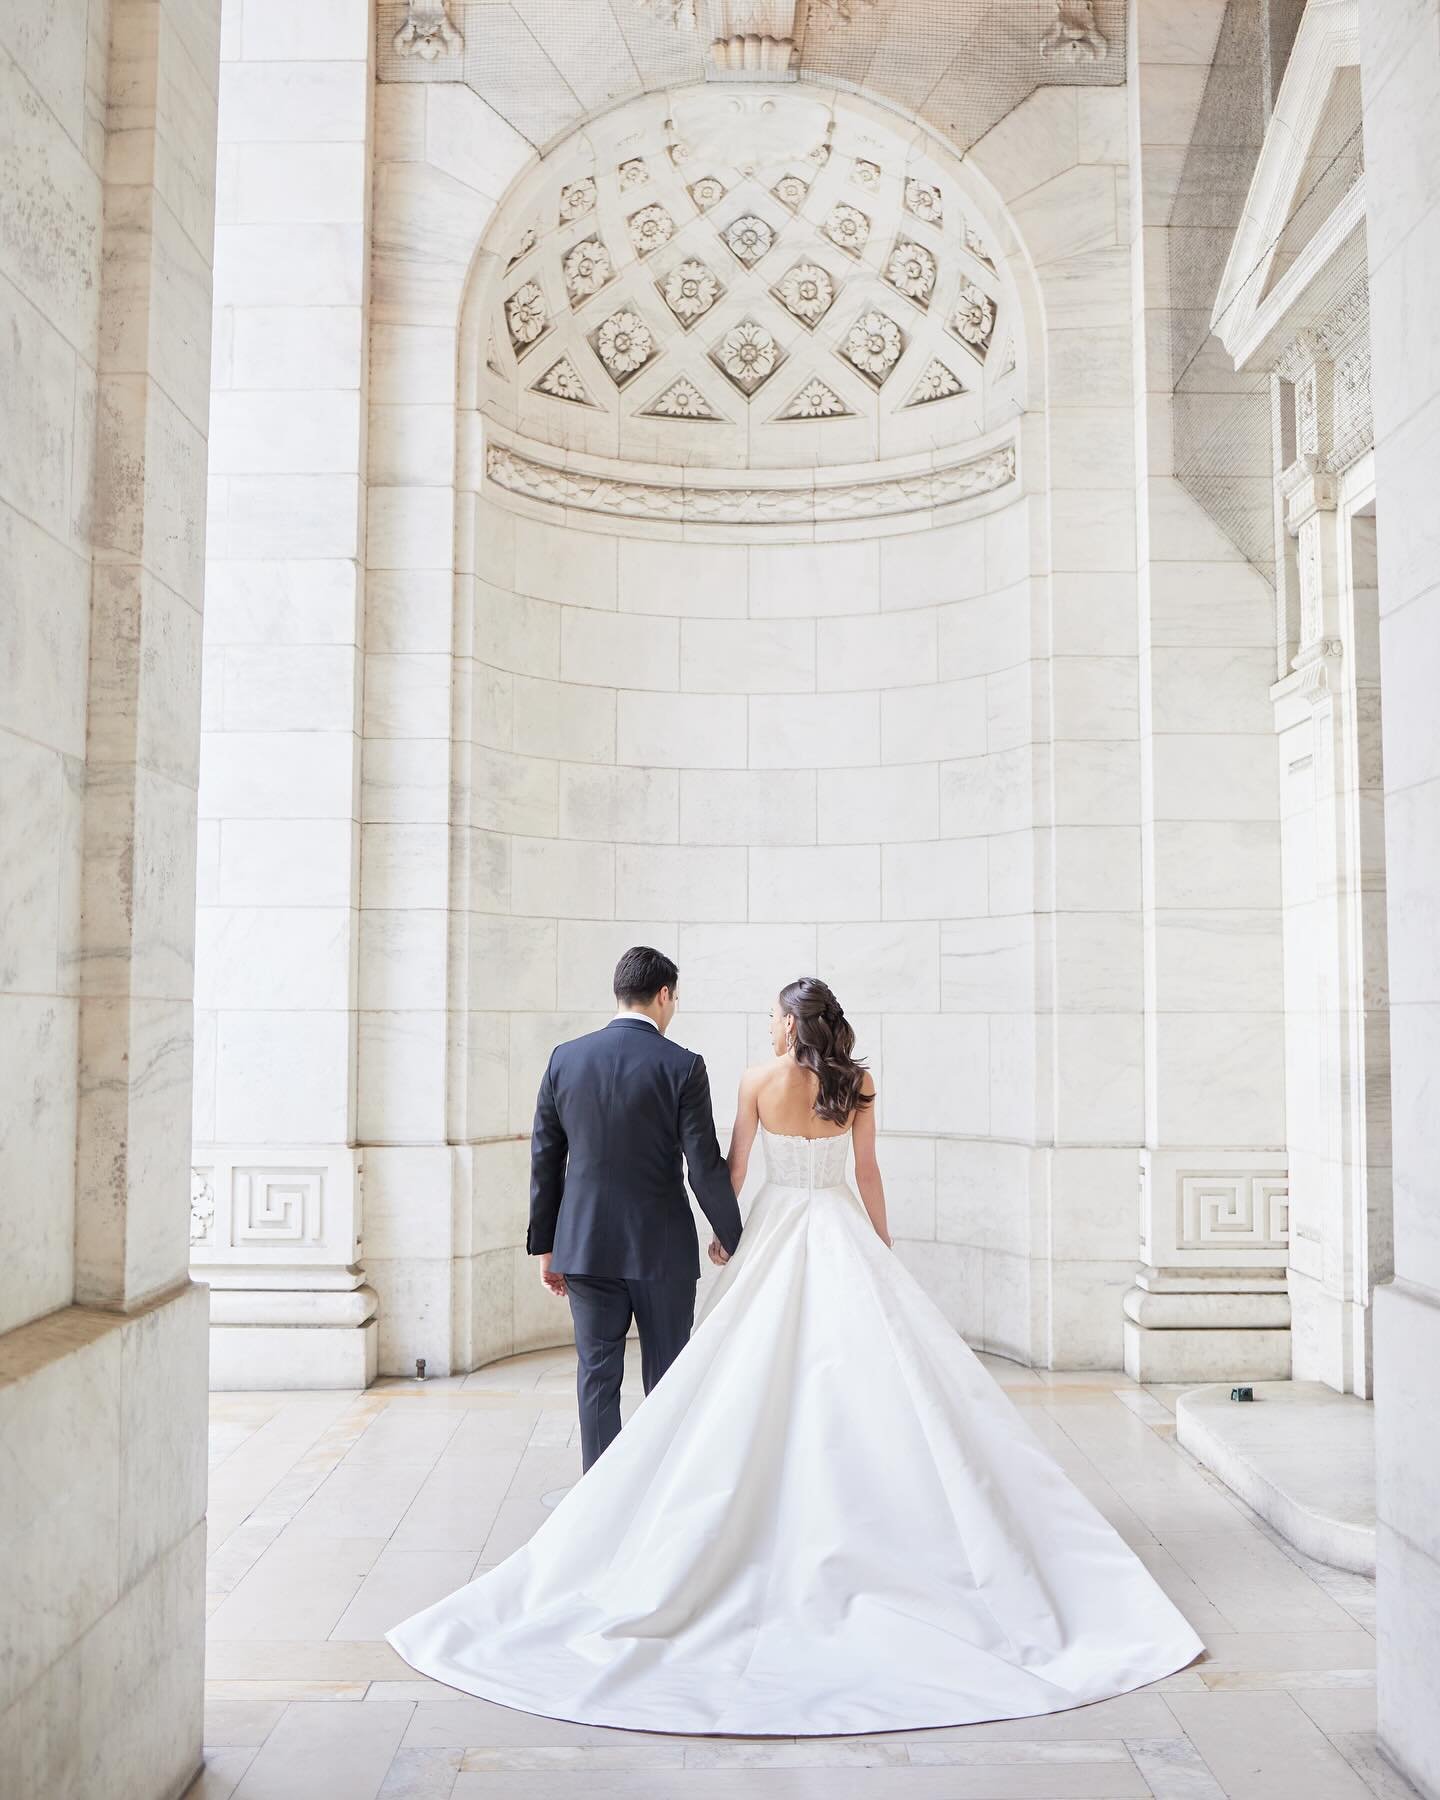 Forever hand in hand 🤍

Hair + Makeup: @beautini
Photographer: @shawnconnell 
Videography: @aaronnovakfilms 
Dress: @oscardelarenta 
Bridal Attendants: @thestylishbride 
Planning + Design: @strawberrymilkevents @strawberrymilk_anna
Florals: @buunch 